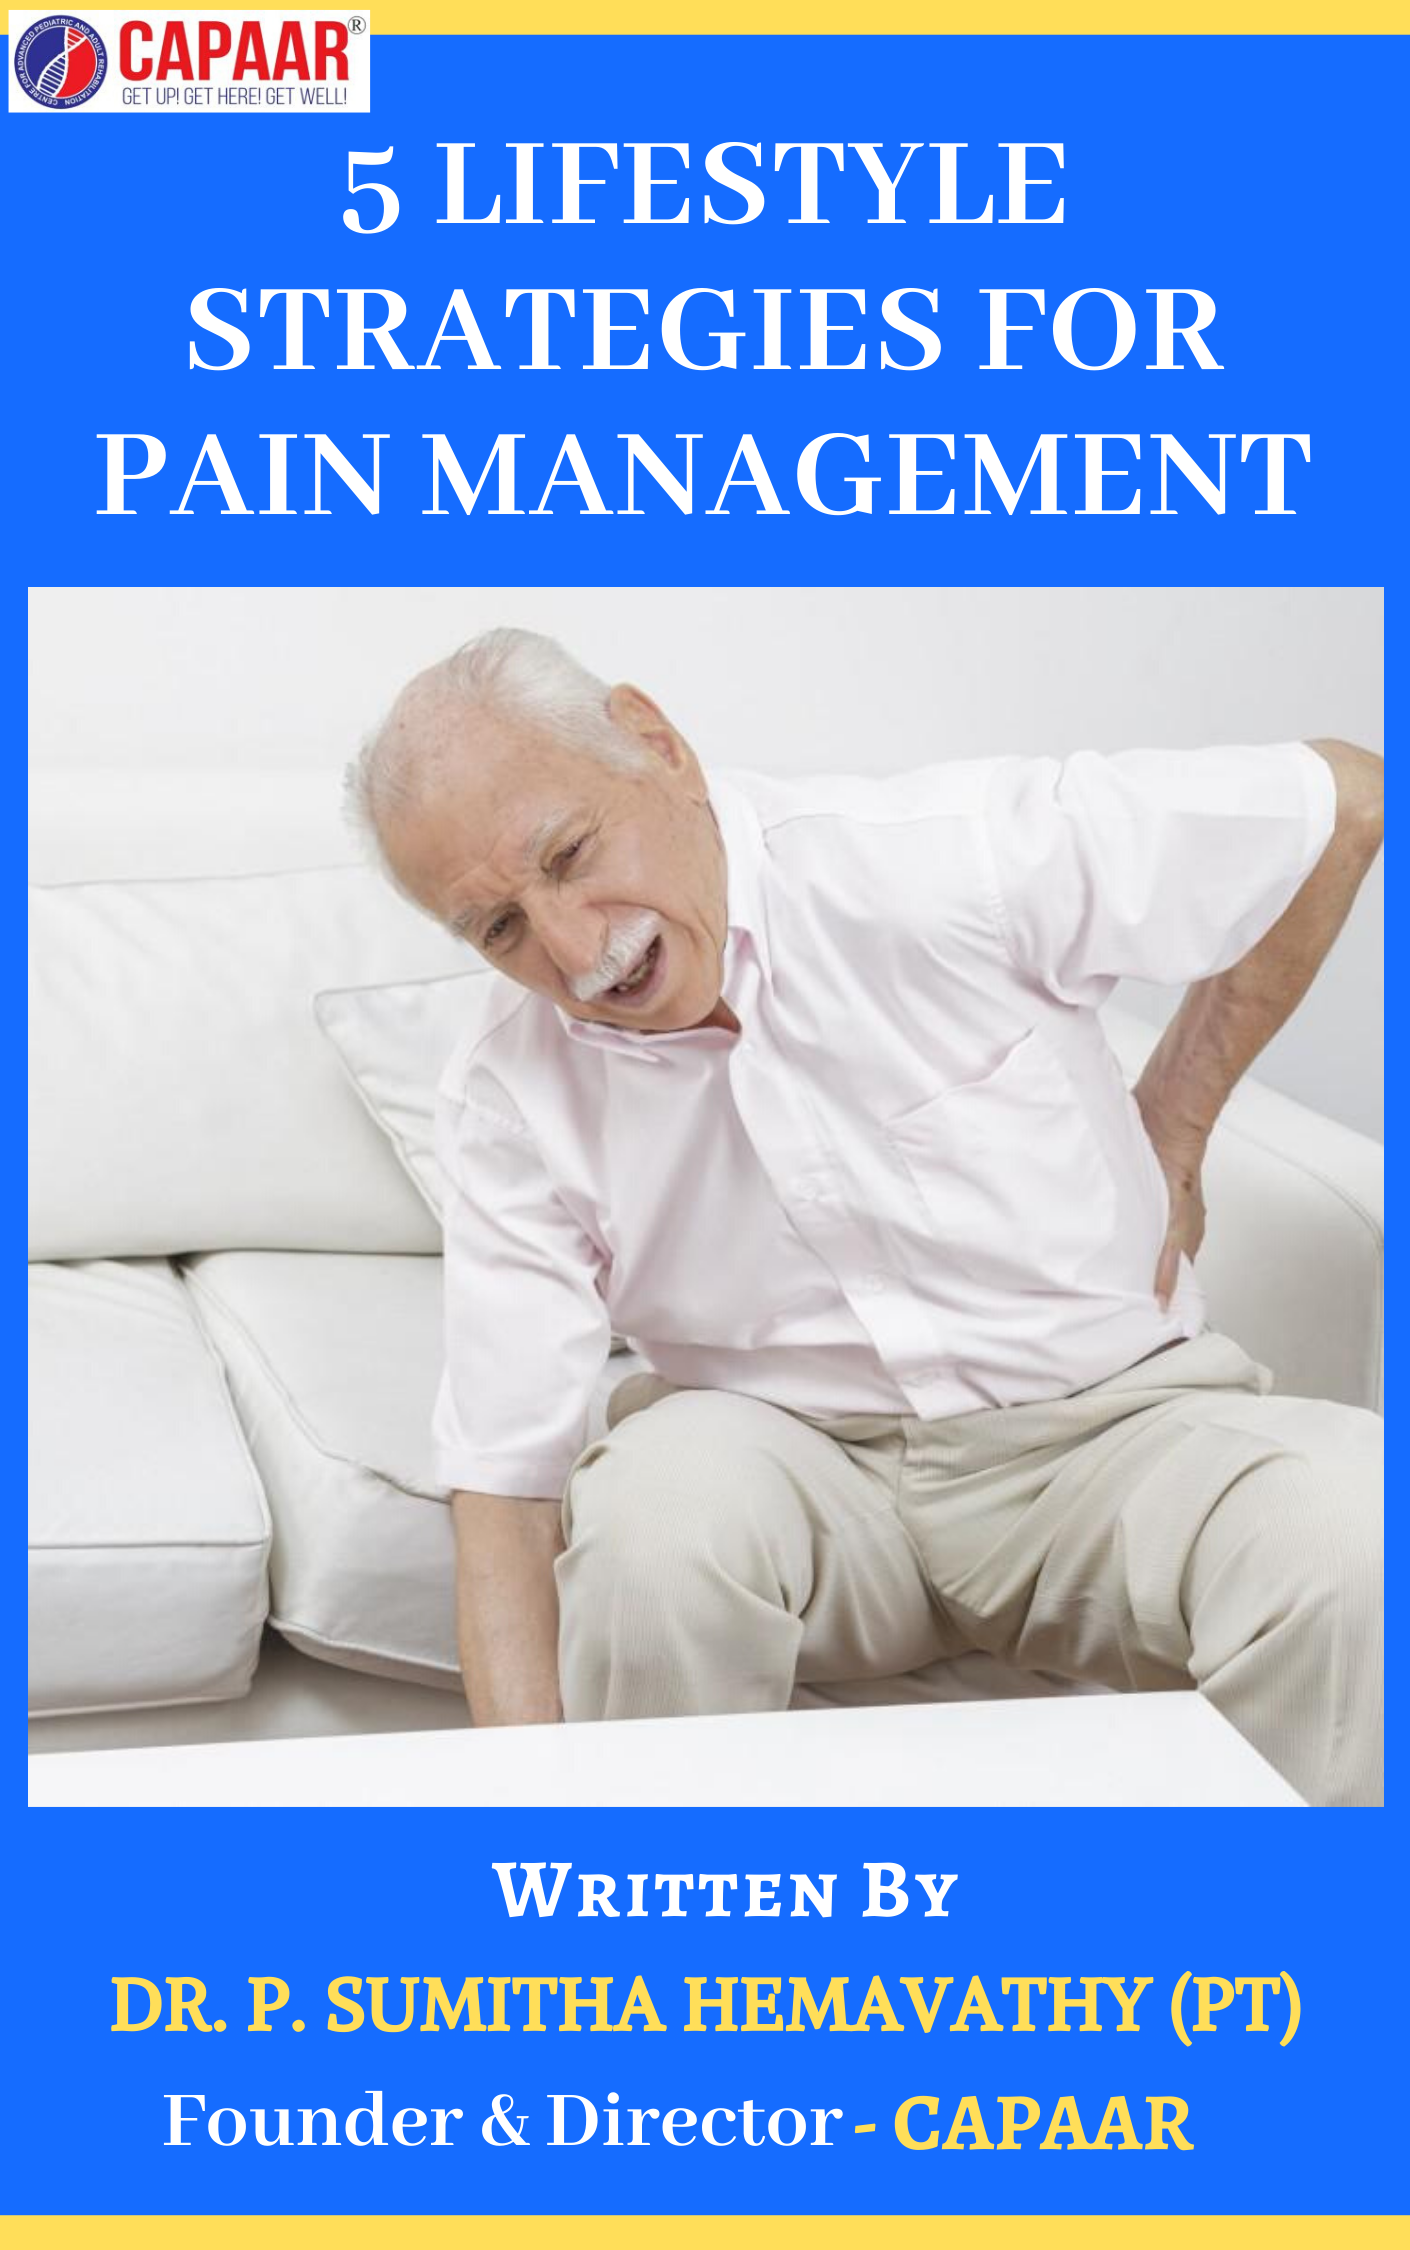 5 Lifestyle Strategies for Pain Management